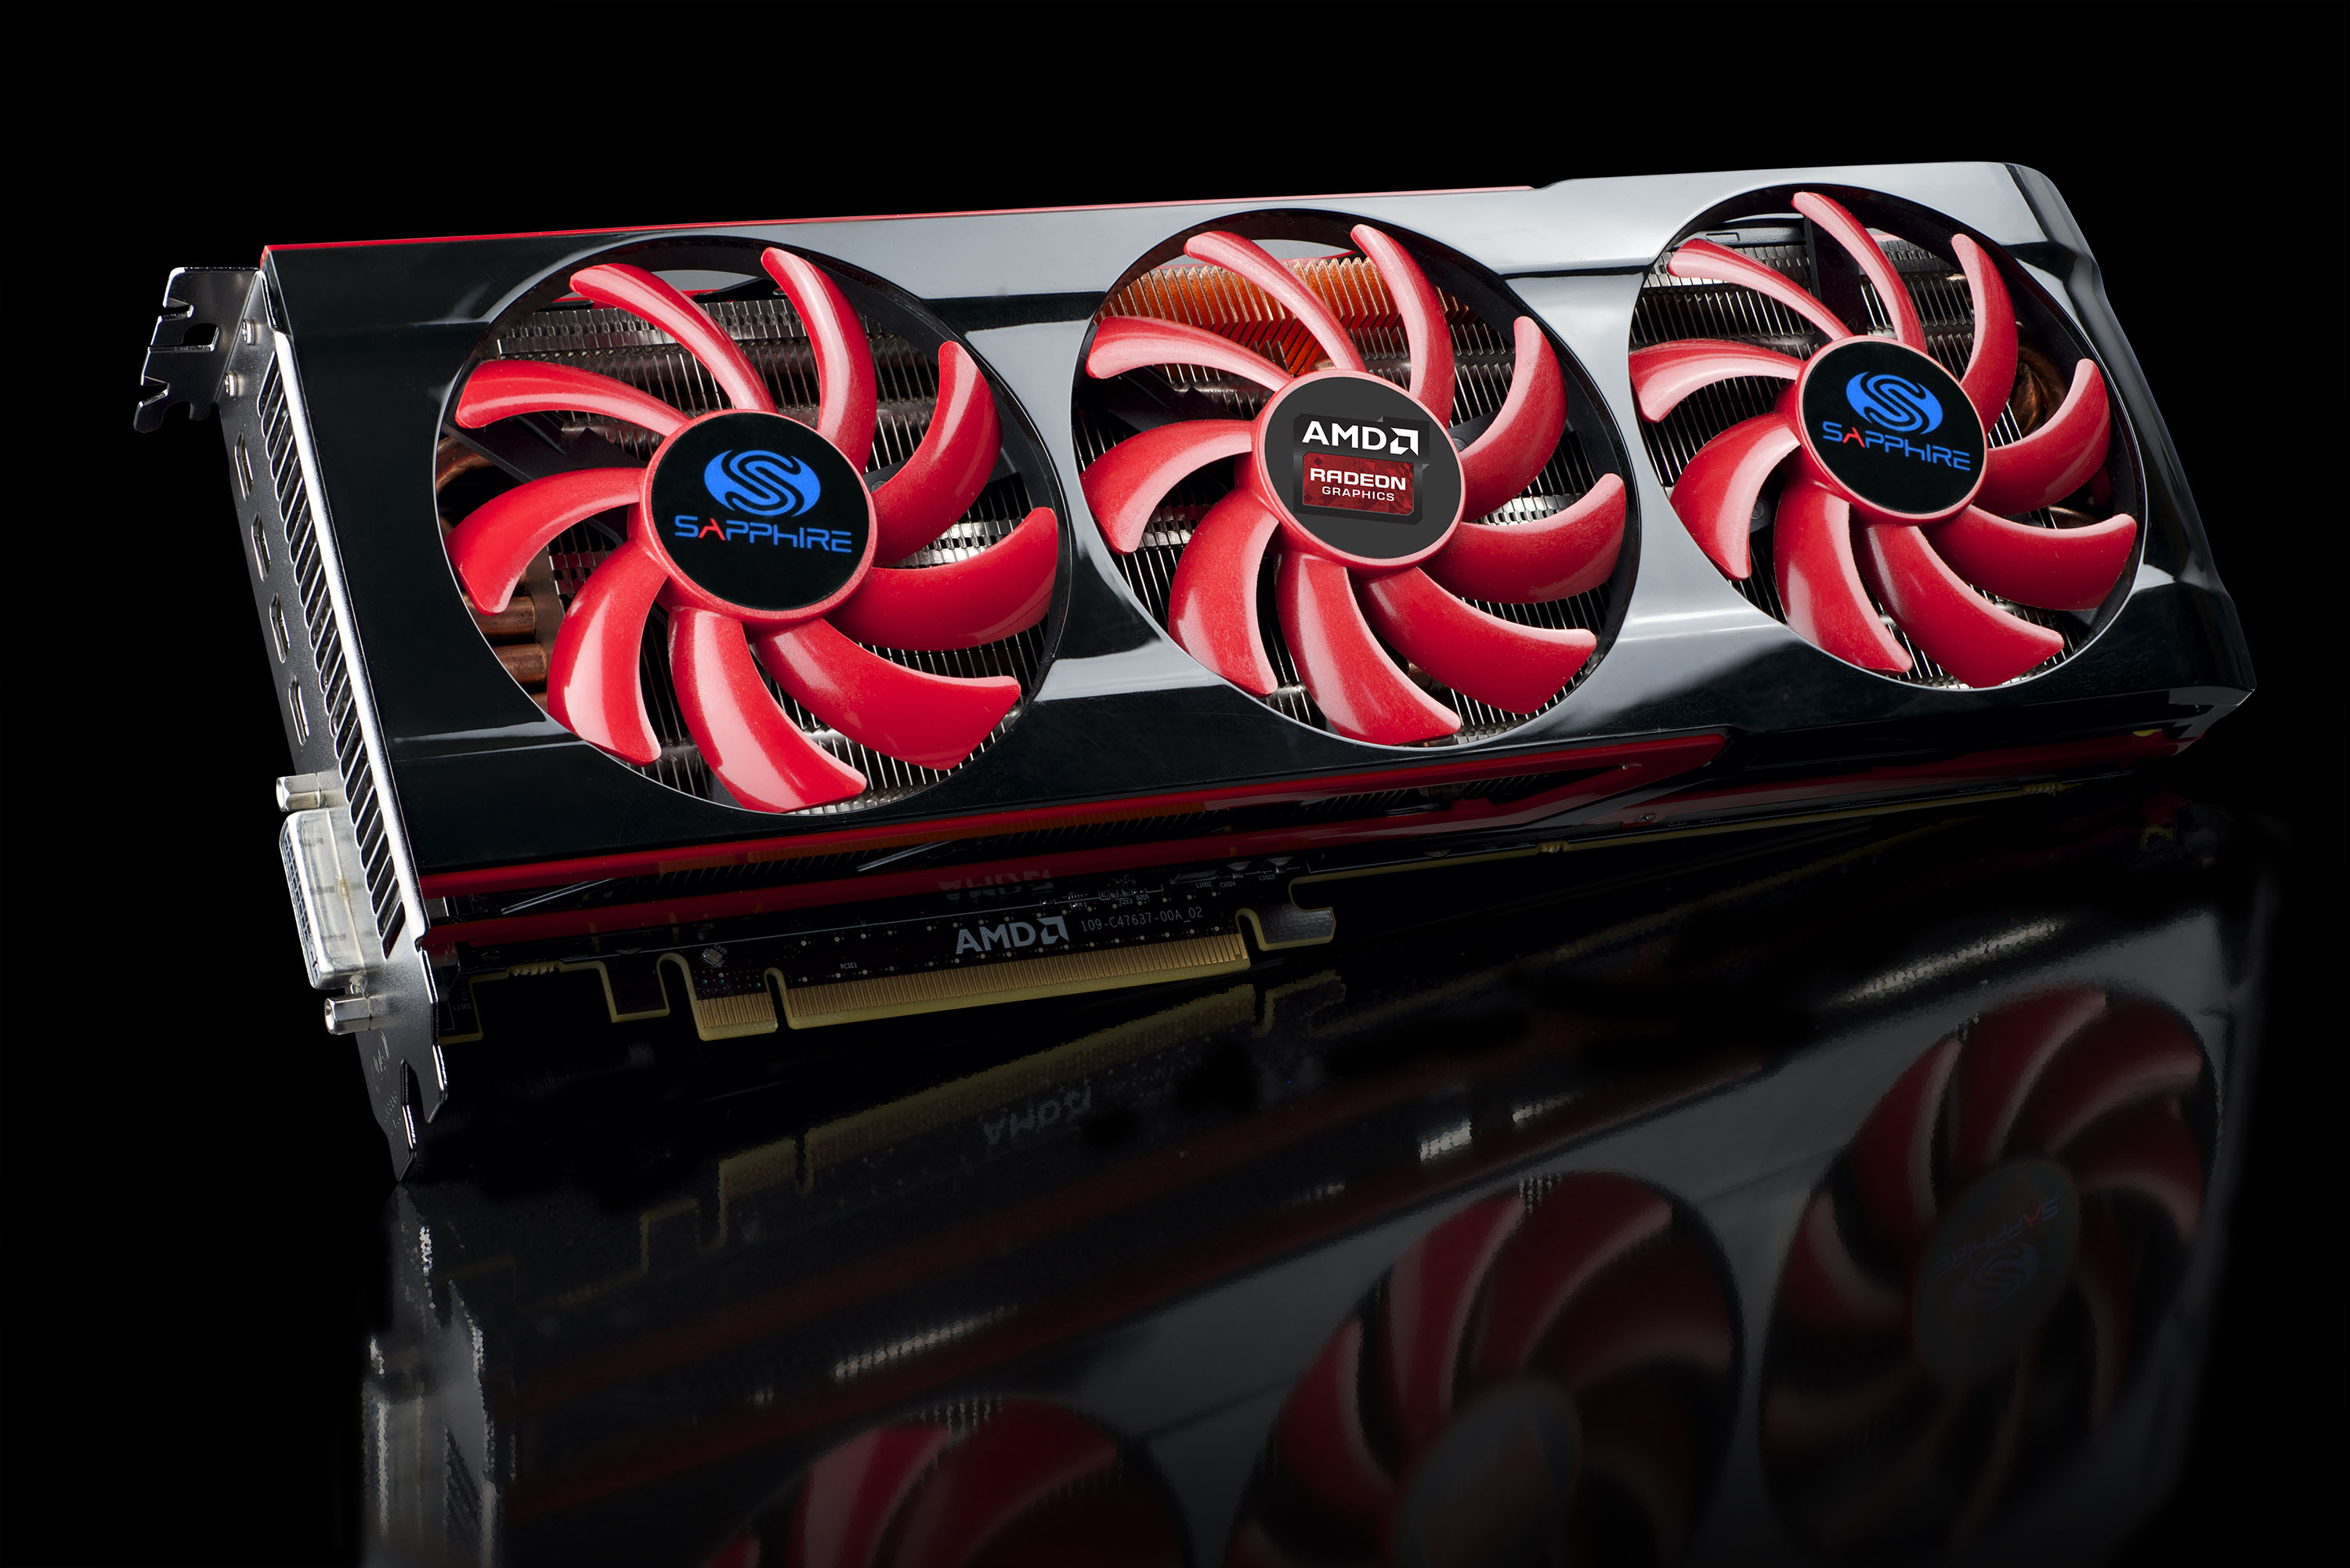 AMD and SAPPHIRE Releases The SAPPHIRE HD 7990 AMD, Sapphire, Video Card 4